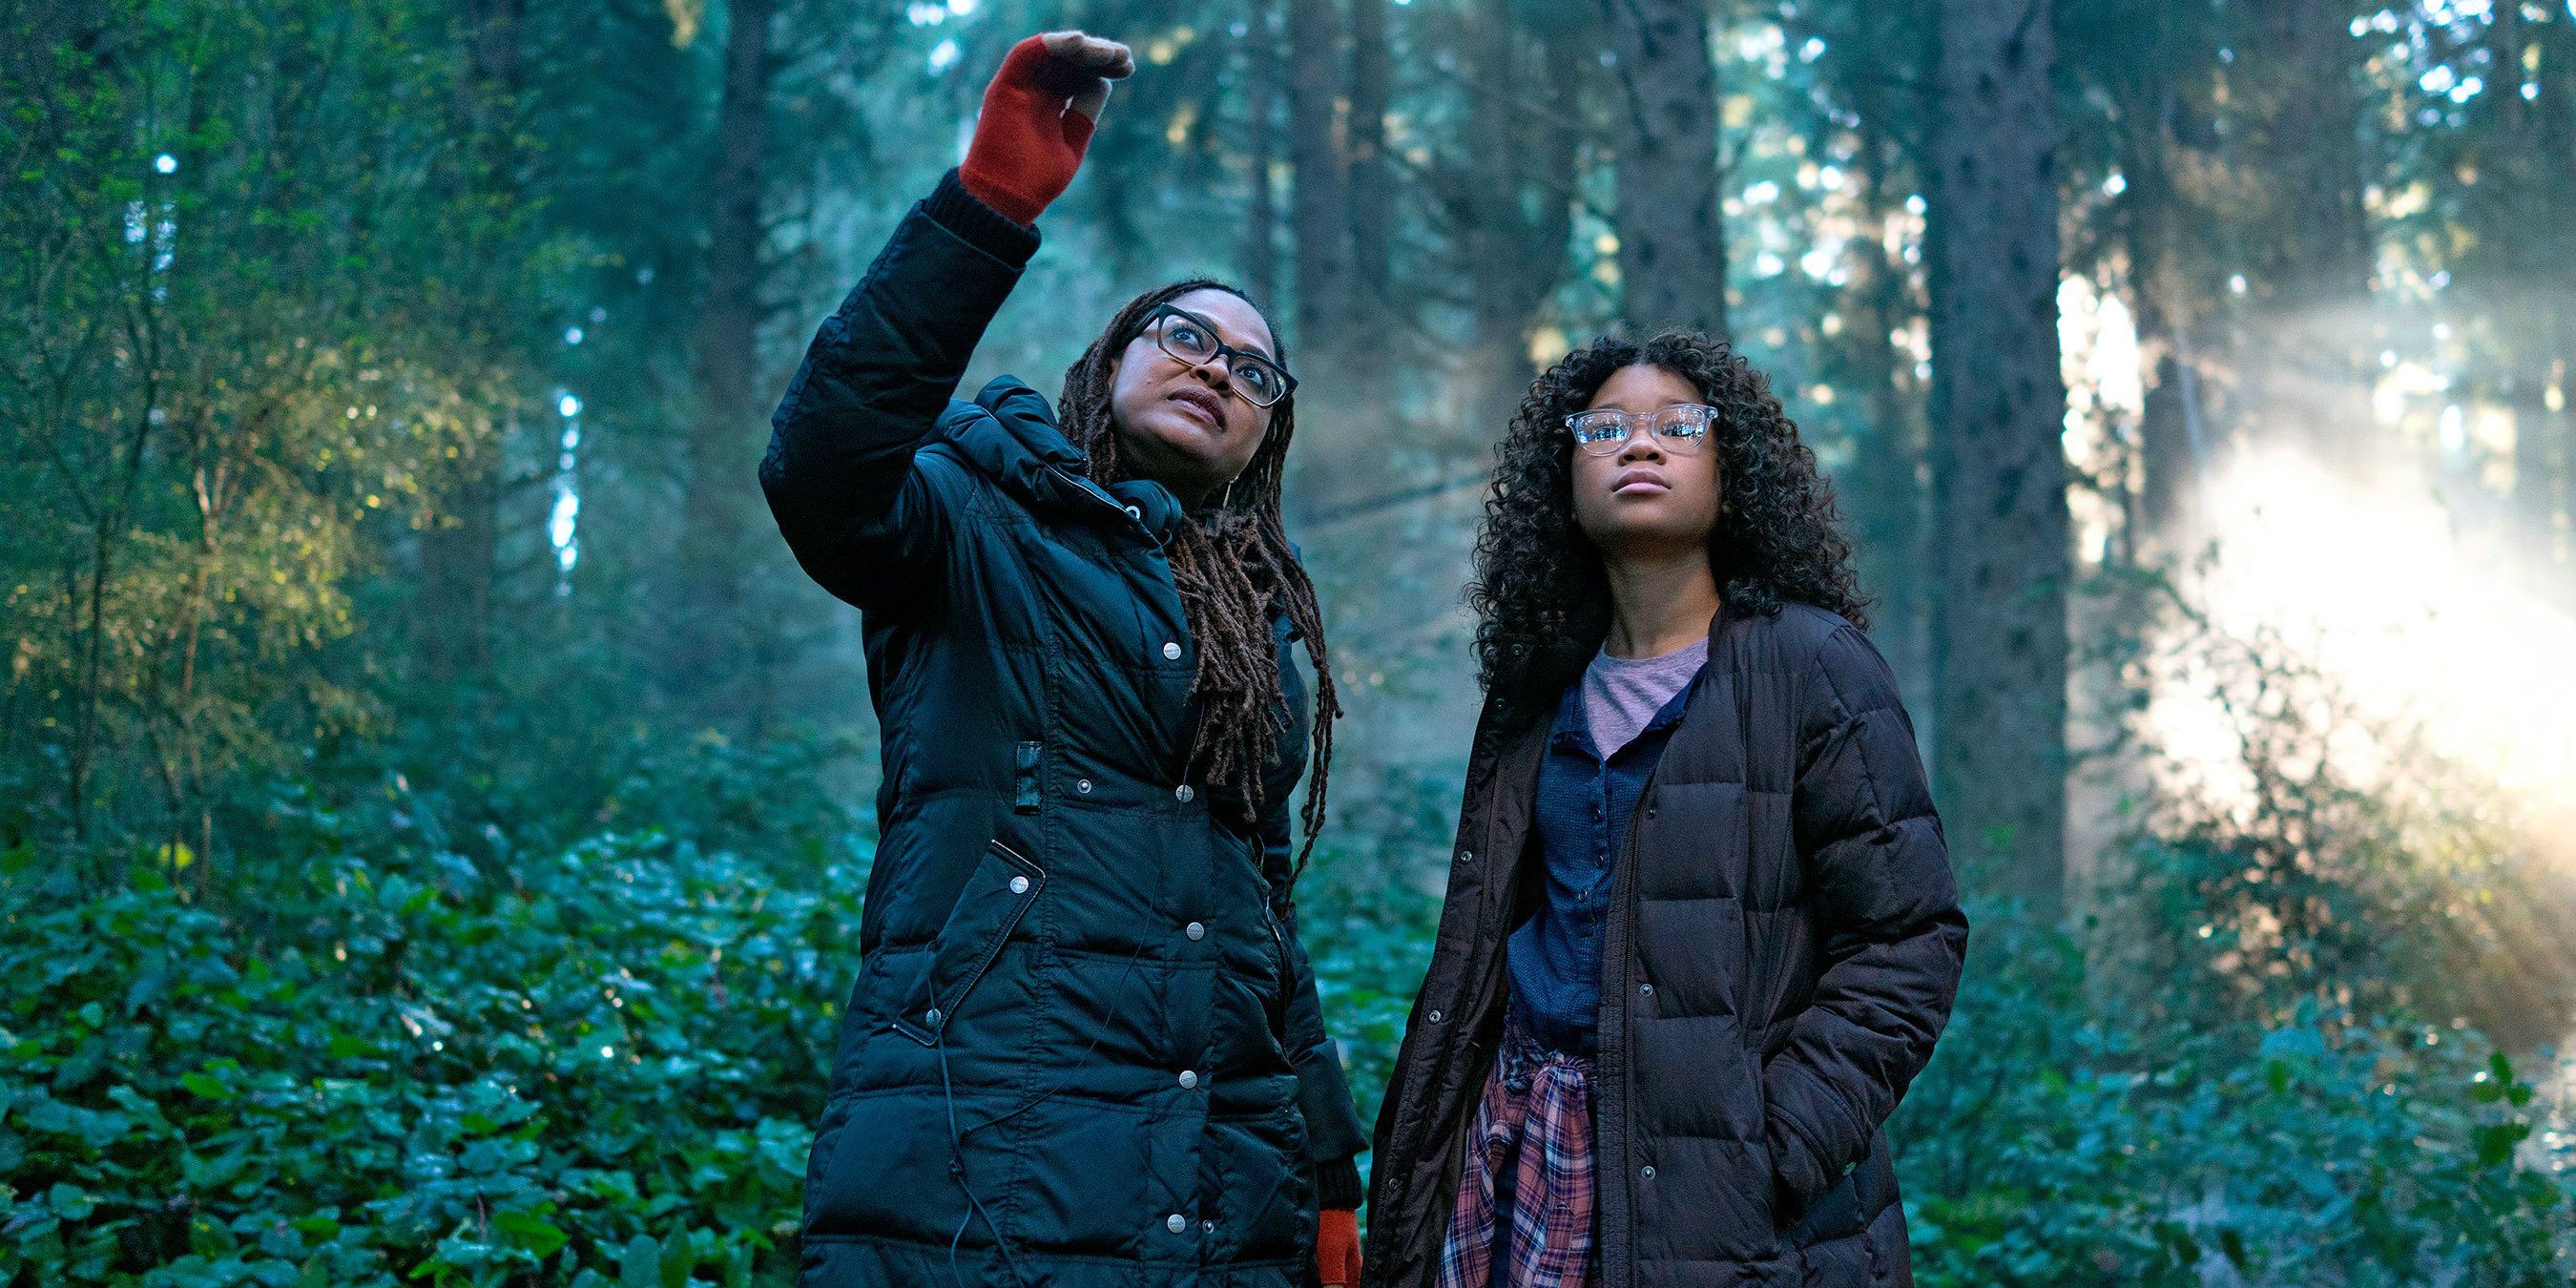 Ava DuVernay and Storm Reid talking on the set of A Wrinkle in Time